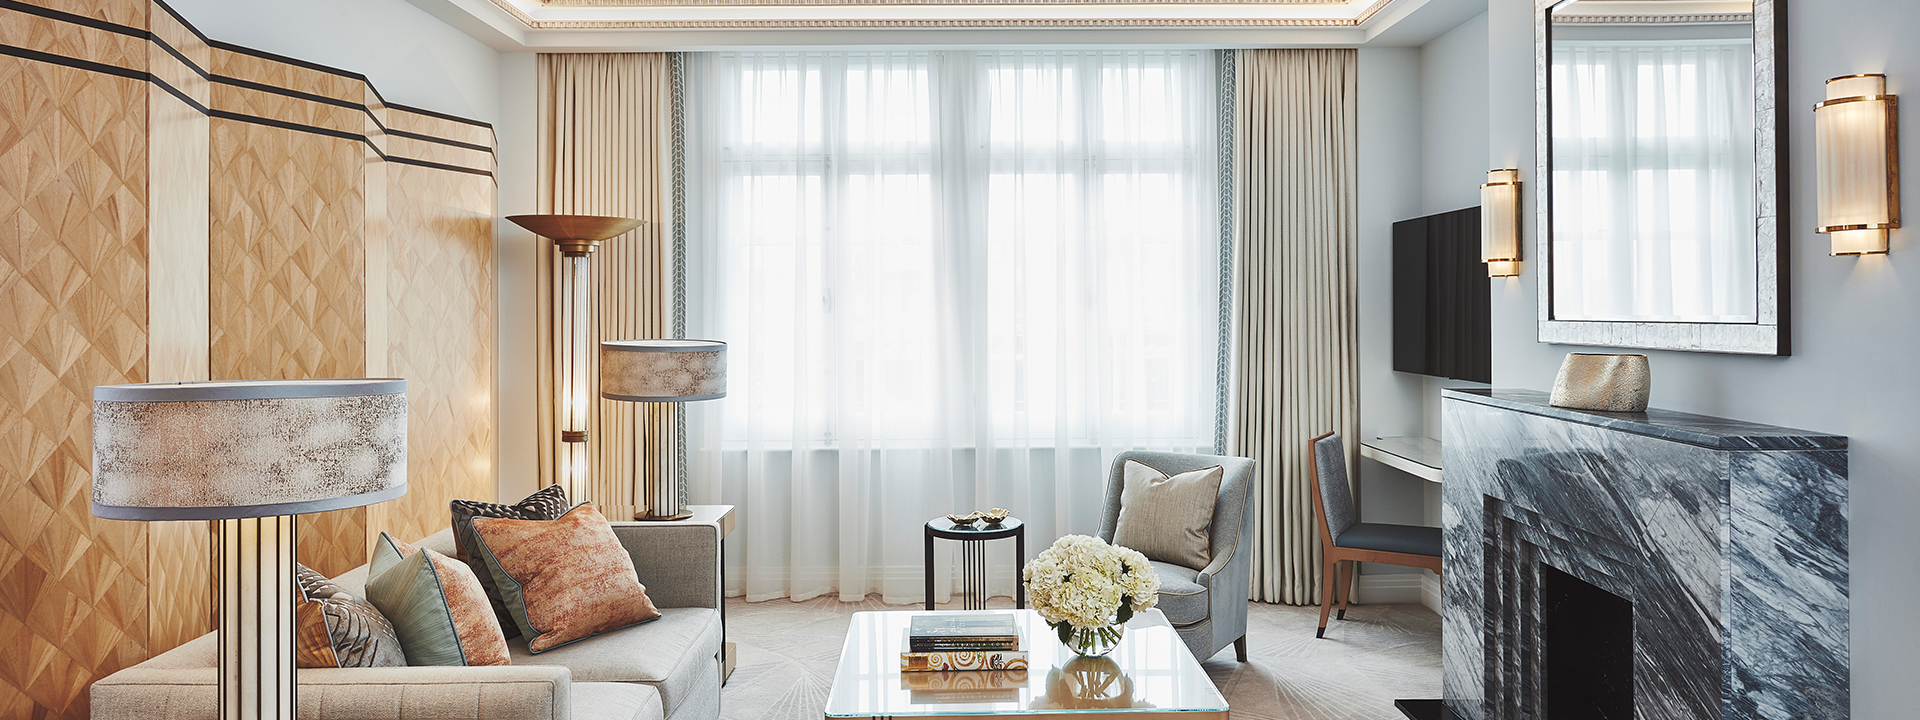 Magnificent sitting room in Claridge's Suite, with luxurious details in the interior with lots of natural daylight.